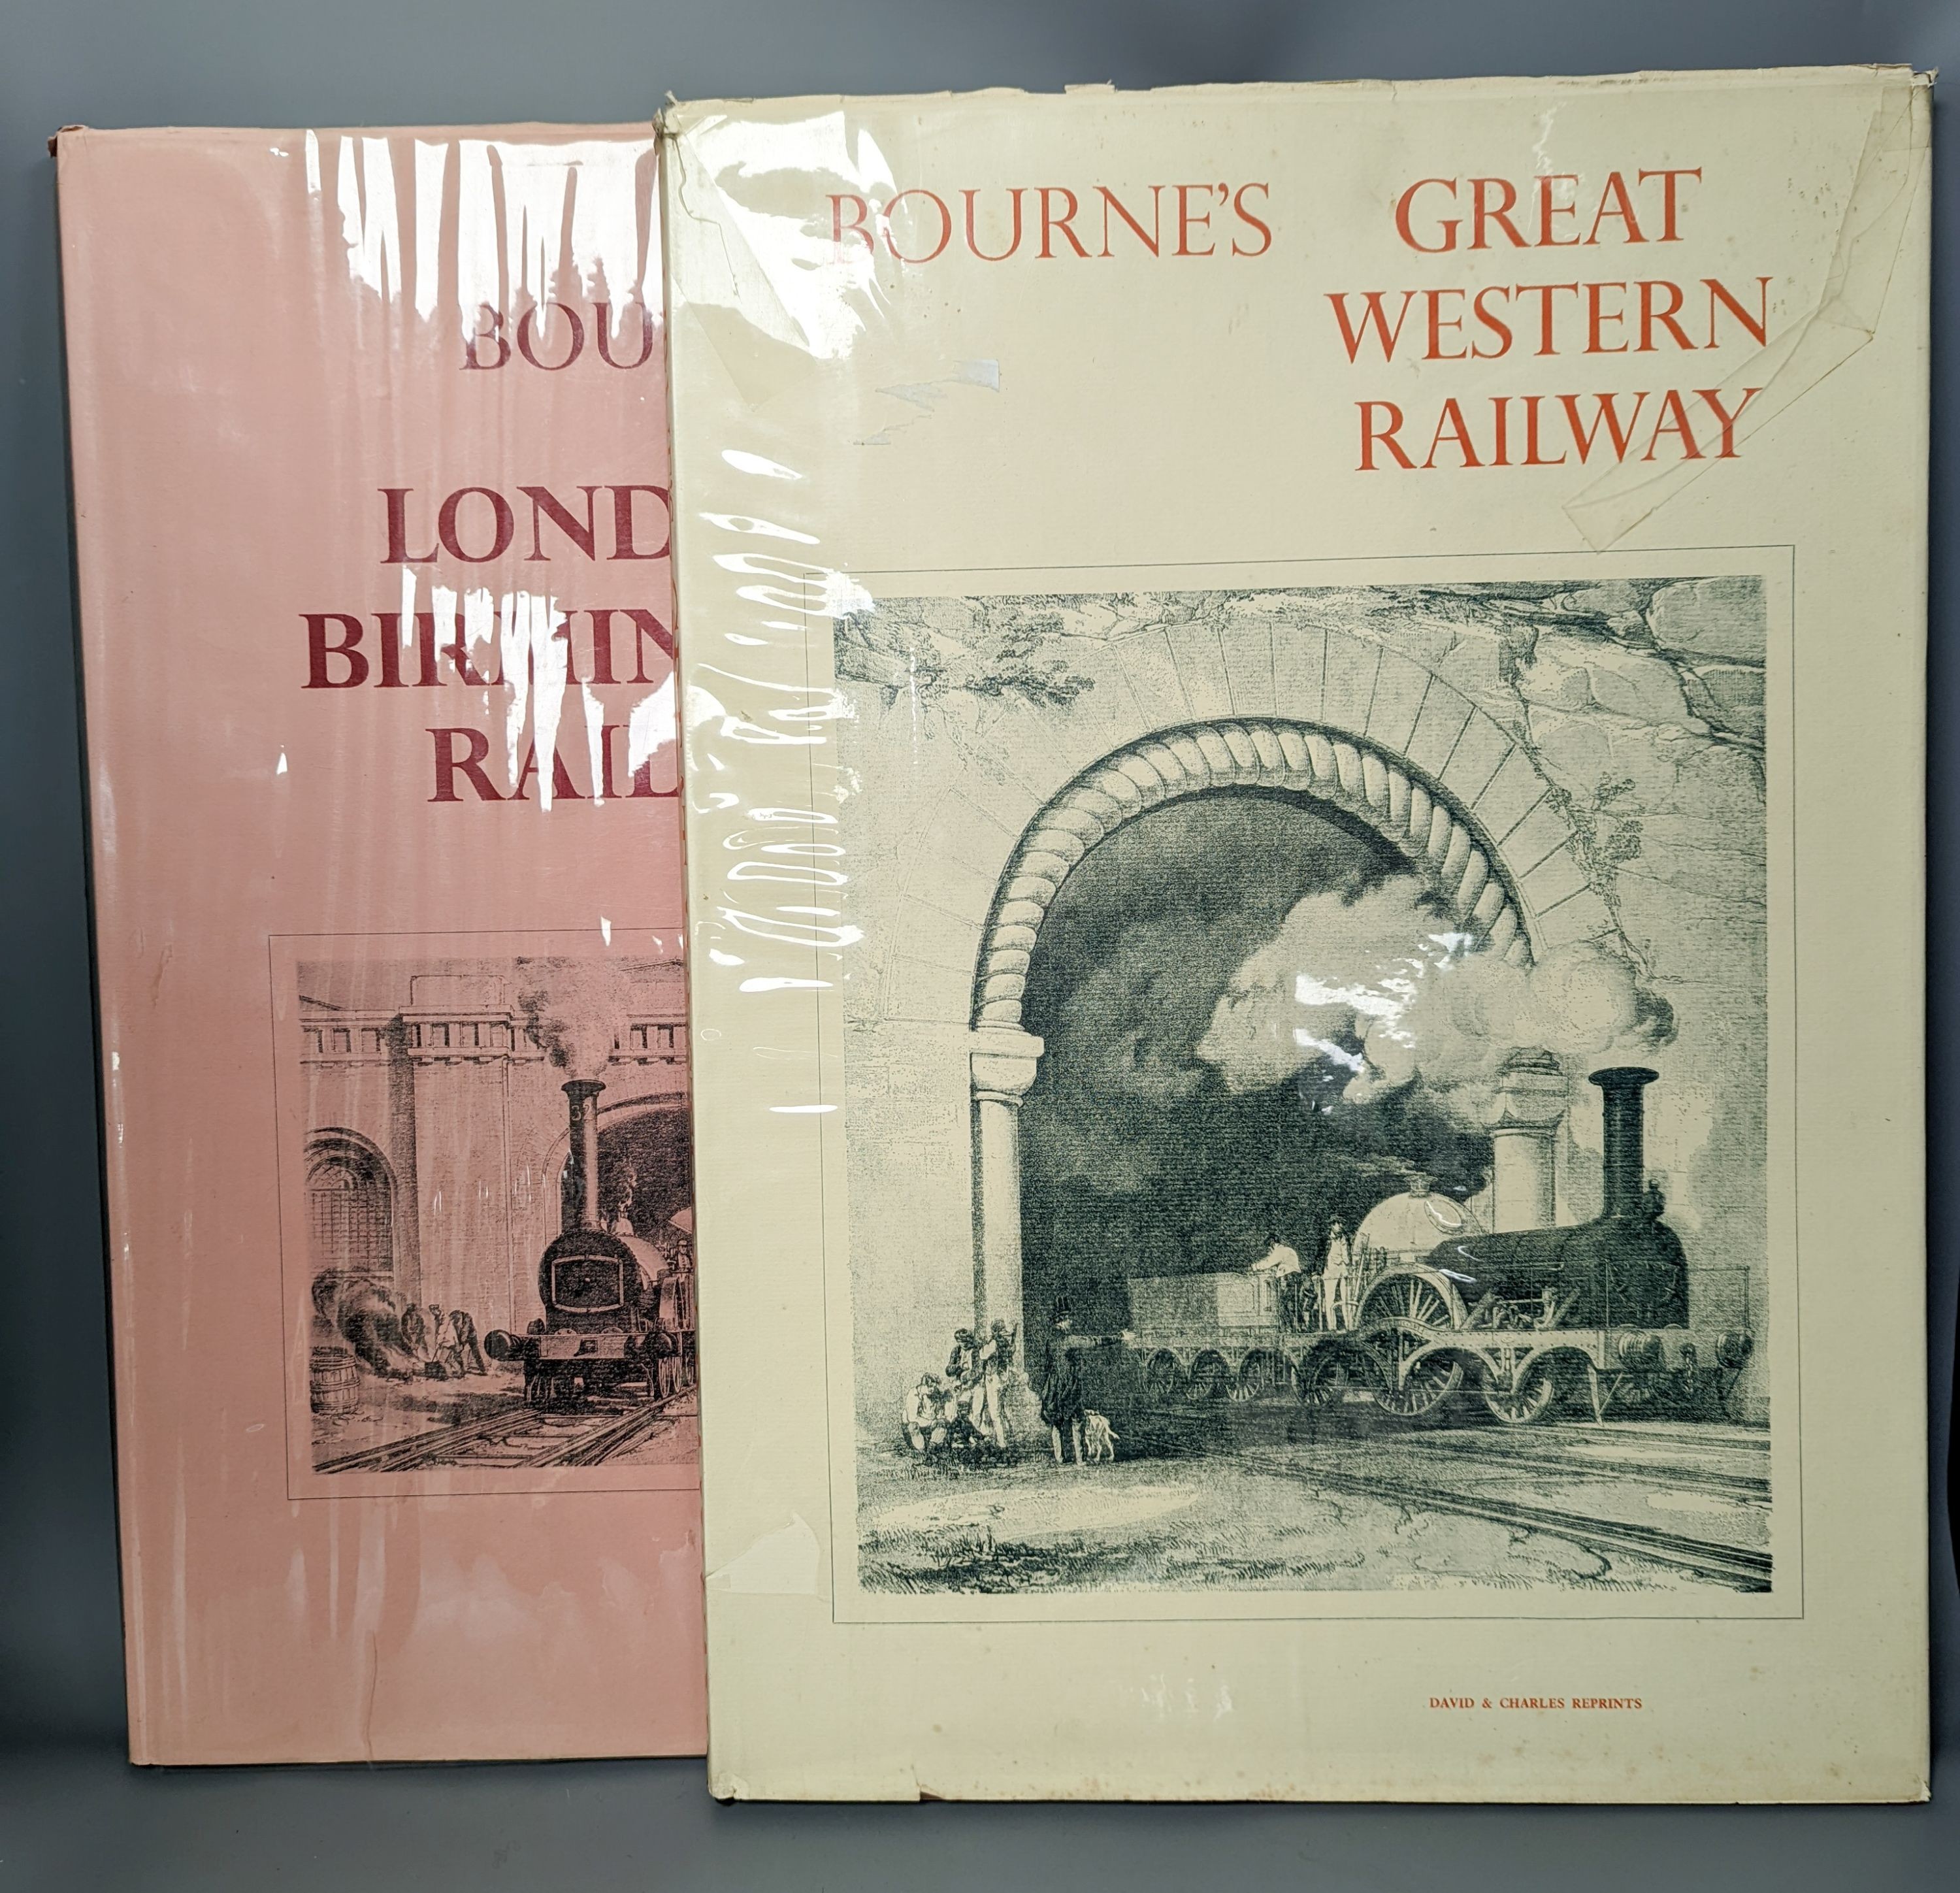 Two Bourne's early railway reference books: London to Birmingham Railway and Great Western Railway